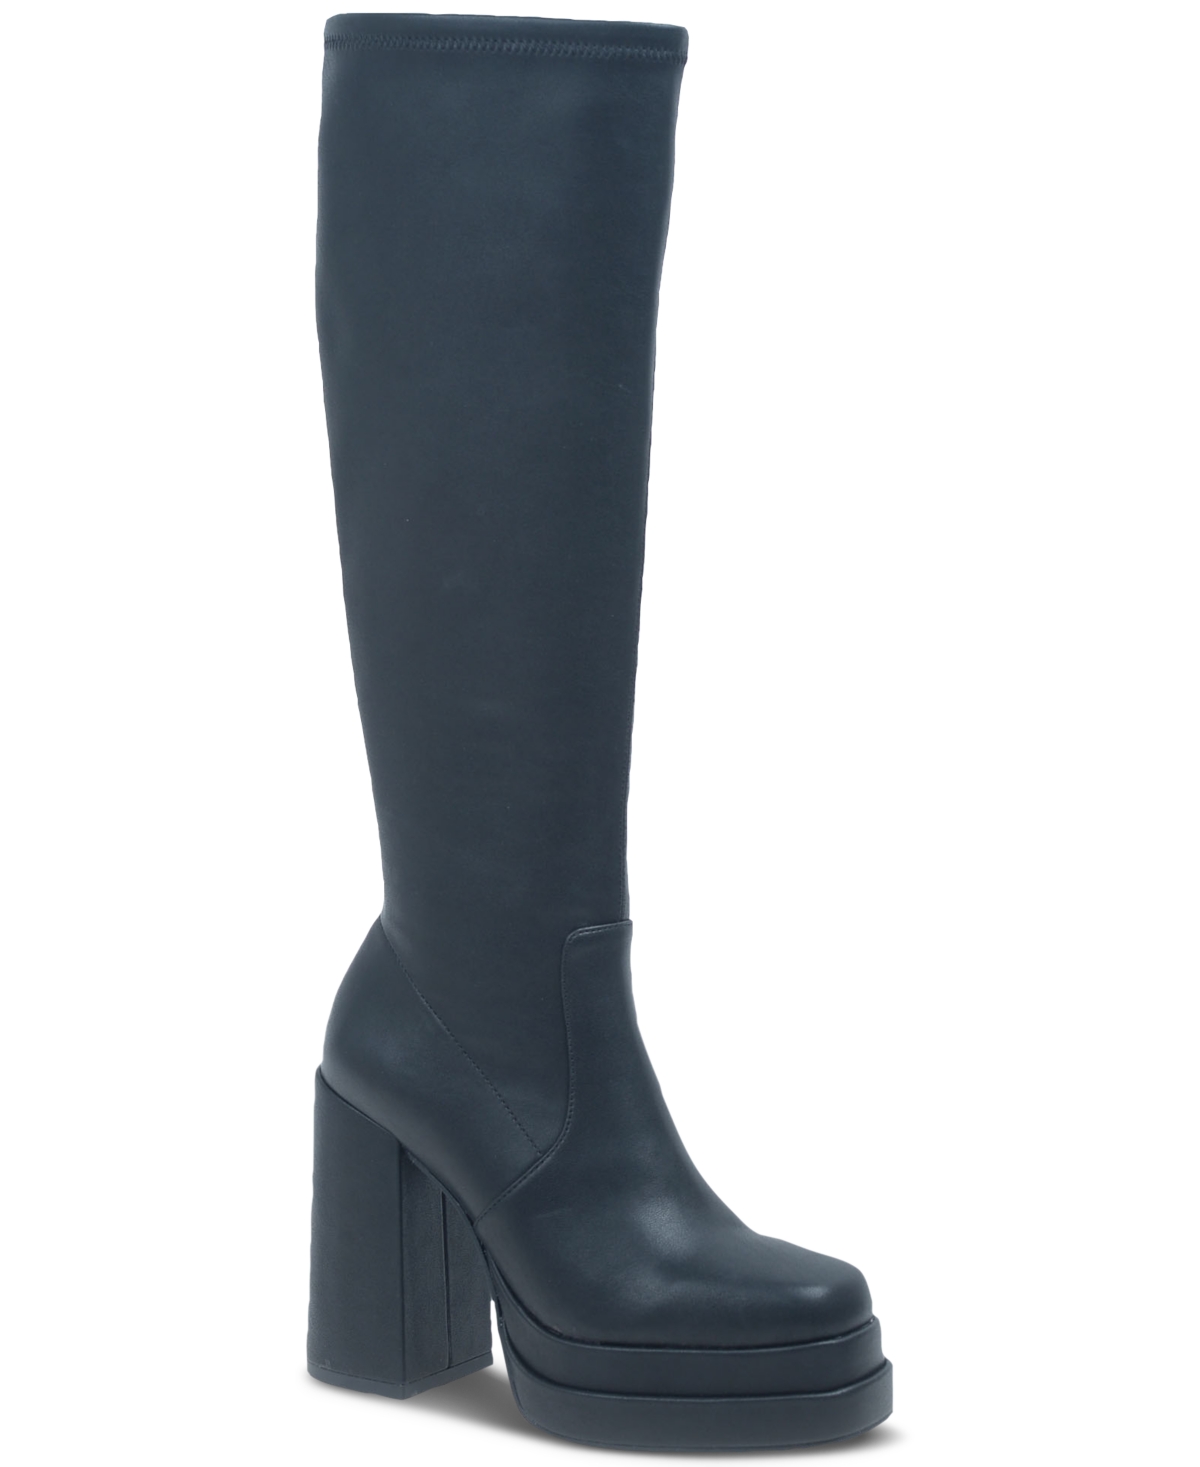 Olyvia Double Platform Boots, Created for Macy's - Black Smooth